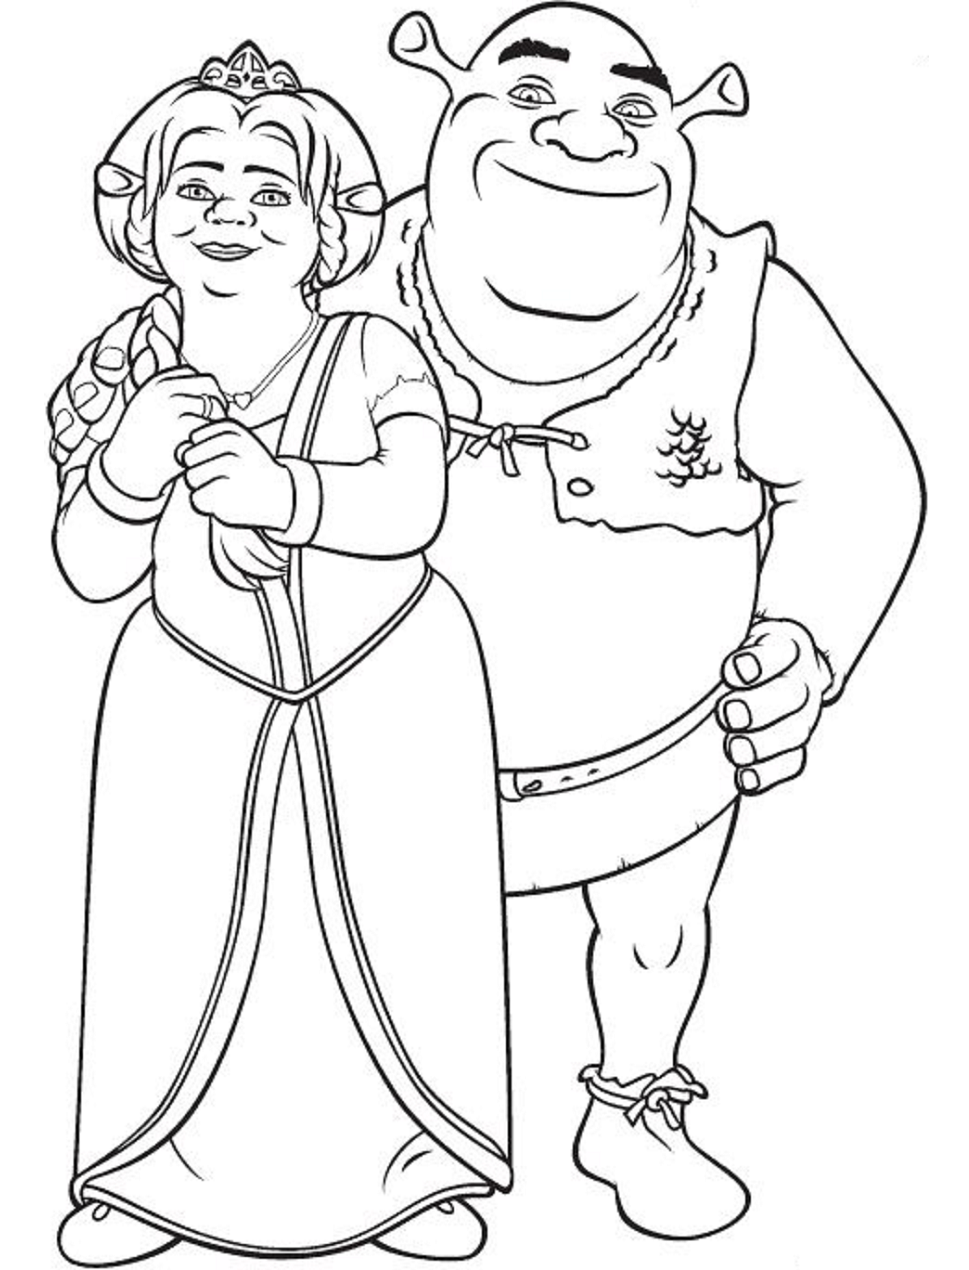 Fiona And Shrek Are Happy Coloring Page - Free Printable Coloring Pages for  Kids